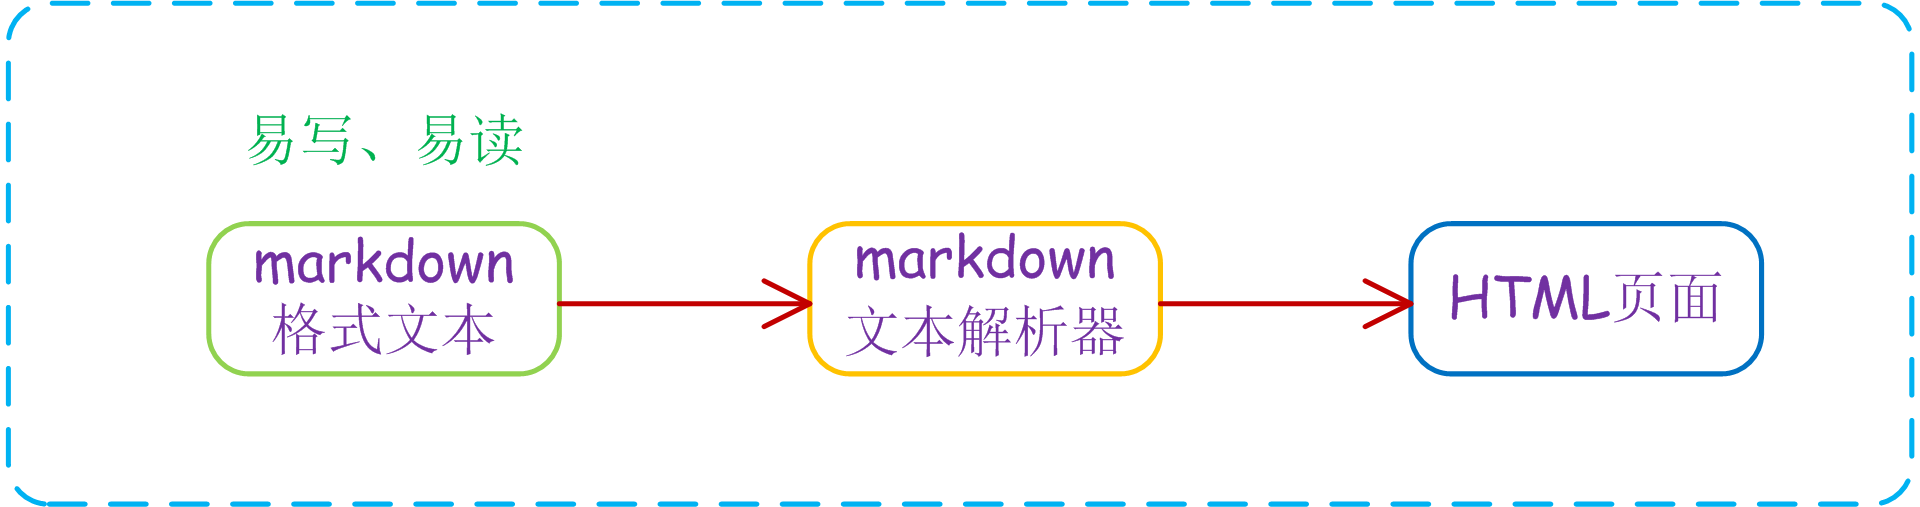 markdown-and-html